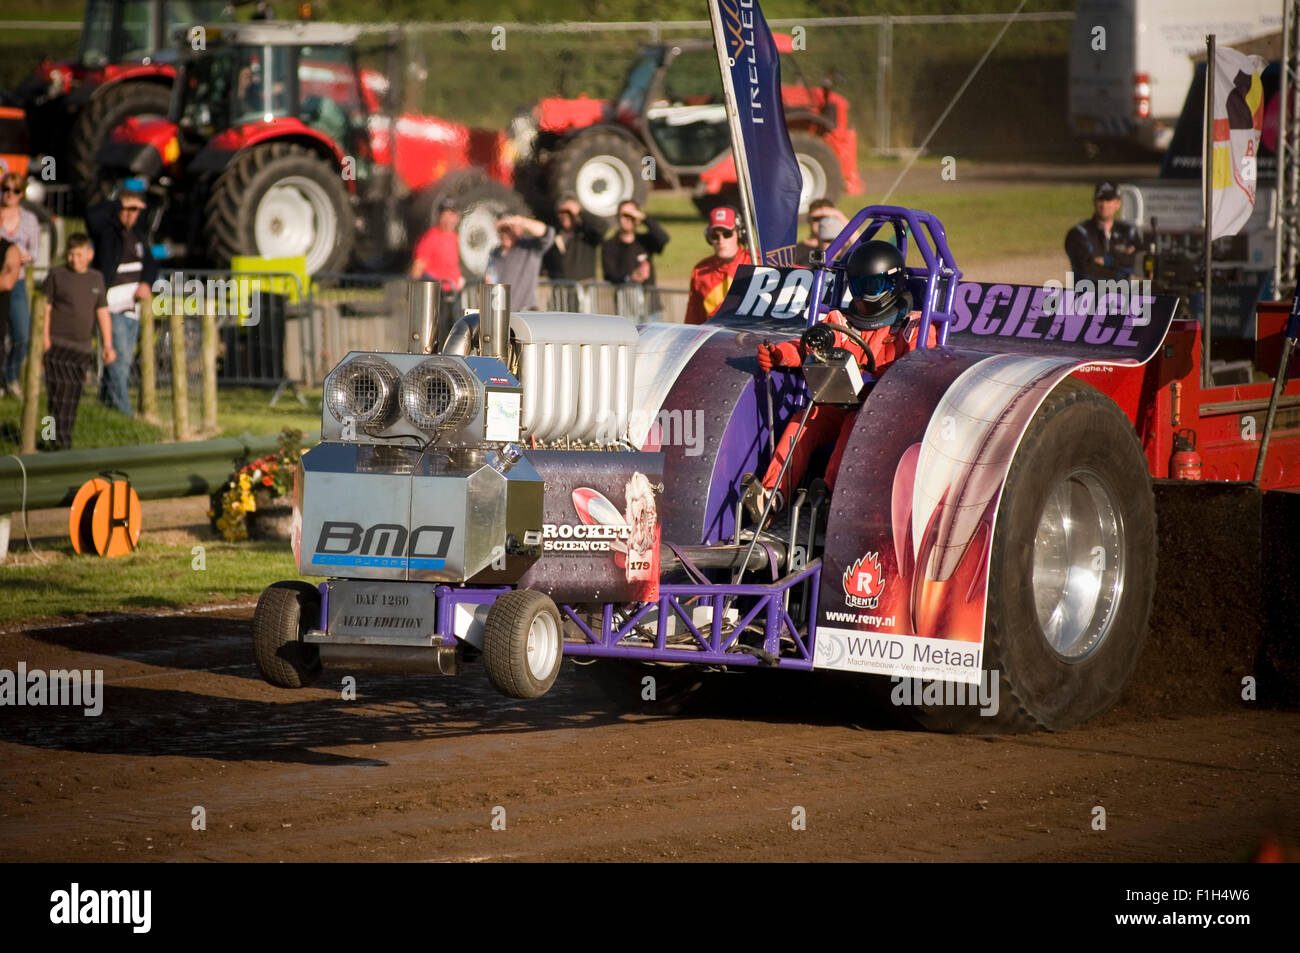 2.5 ton modified tractor competing in a tractor pull using a daf straight 6 truck engine converted to run on methanol fuel Stock Photo